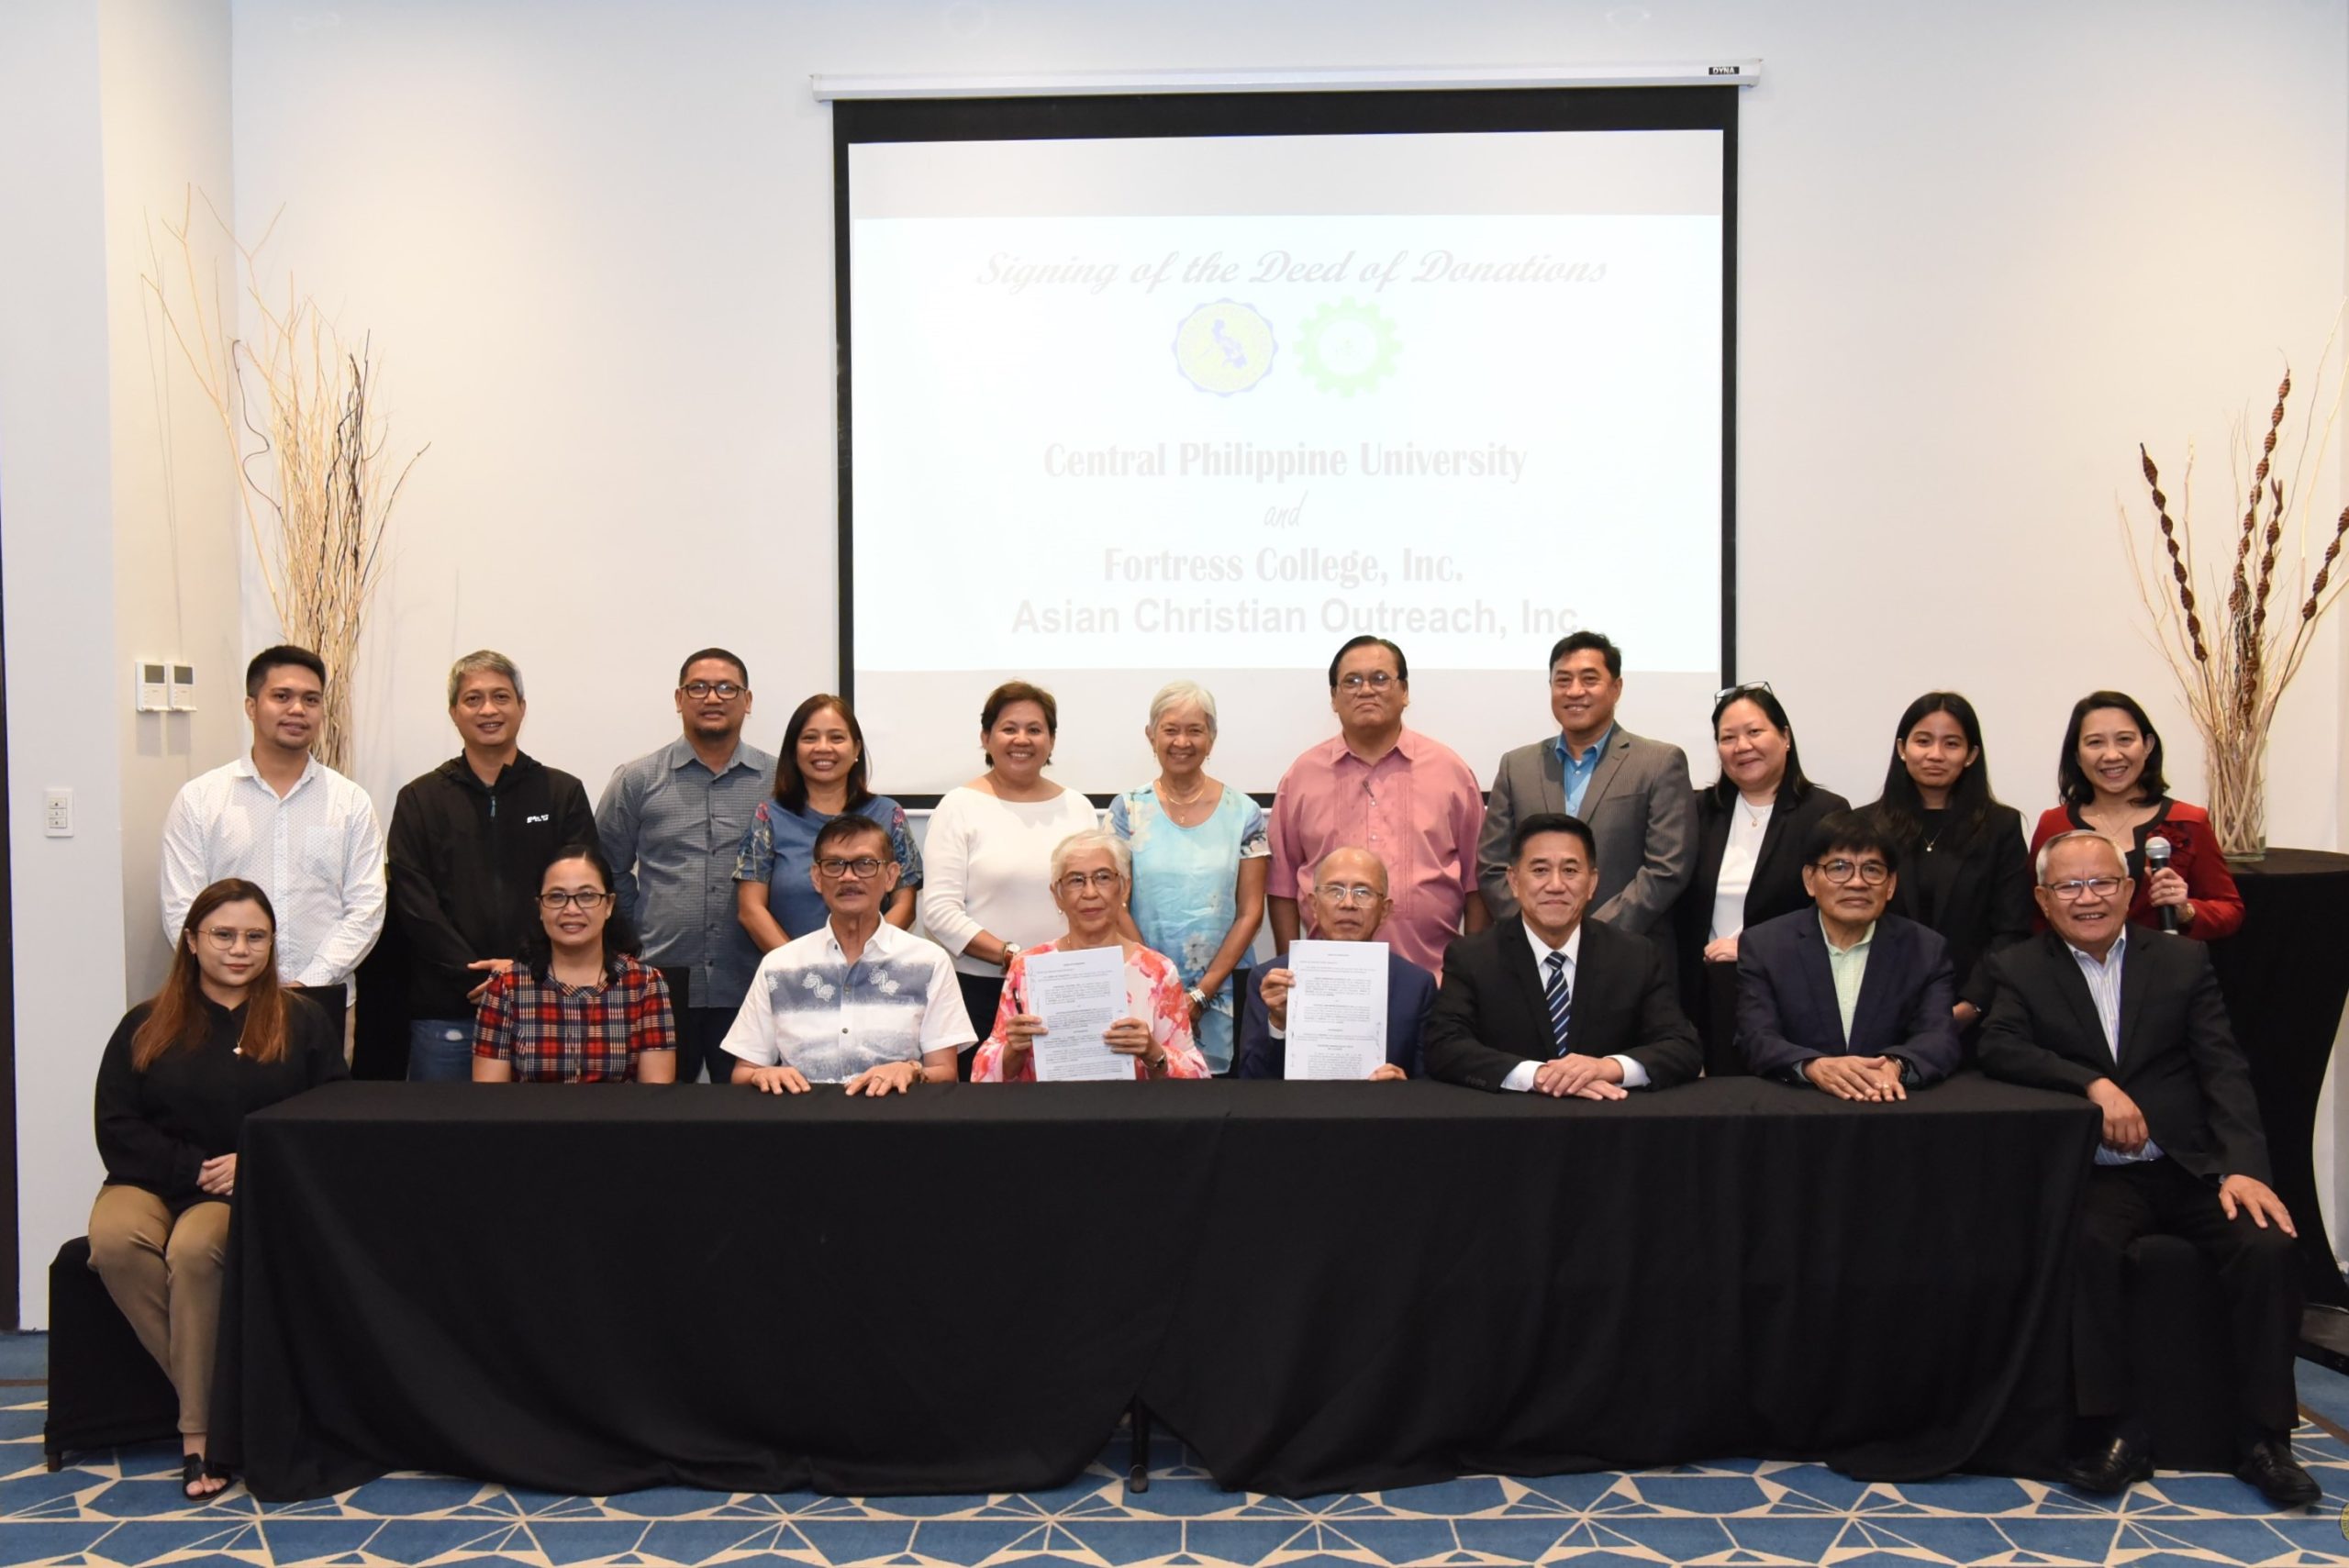 Delegations from CPU, ASCO, Fortress College posed for a photo opportunity after the signing of the Deeds of Donation